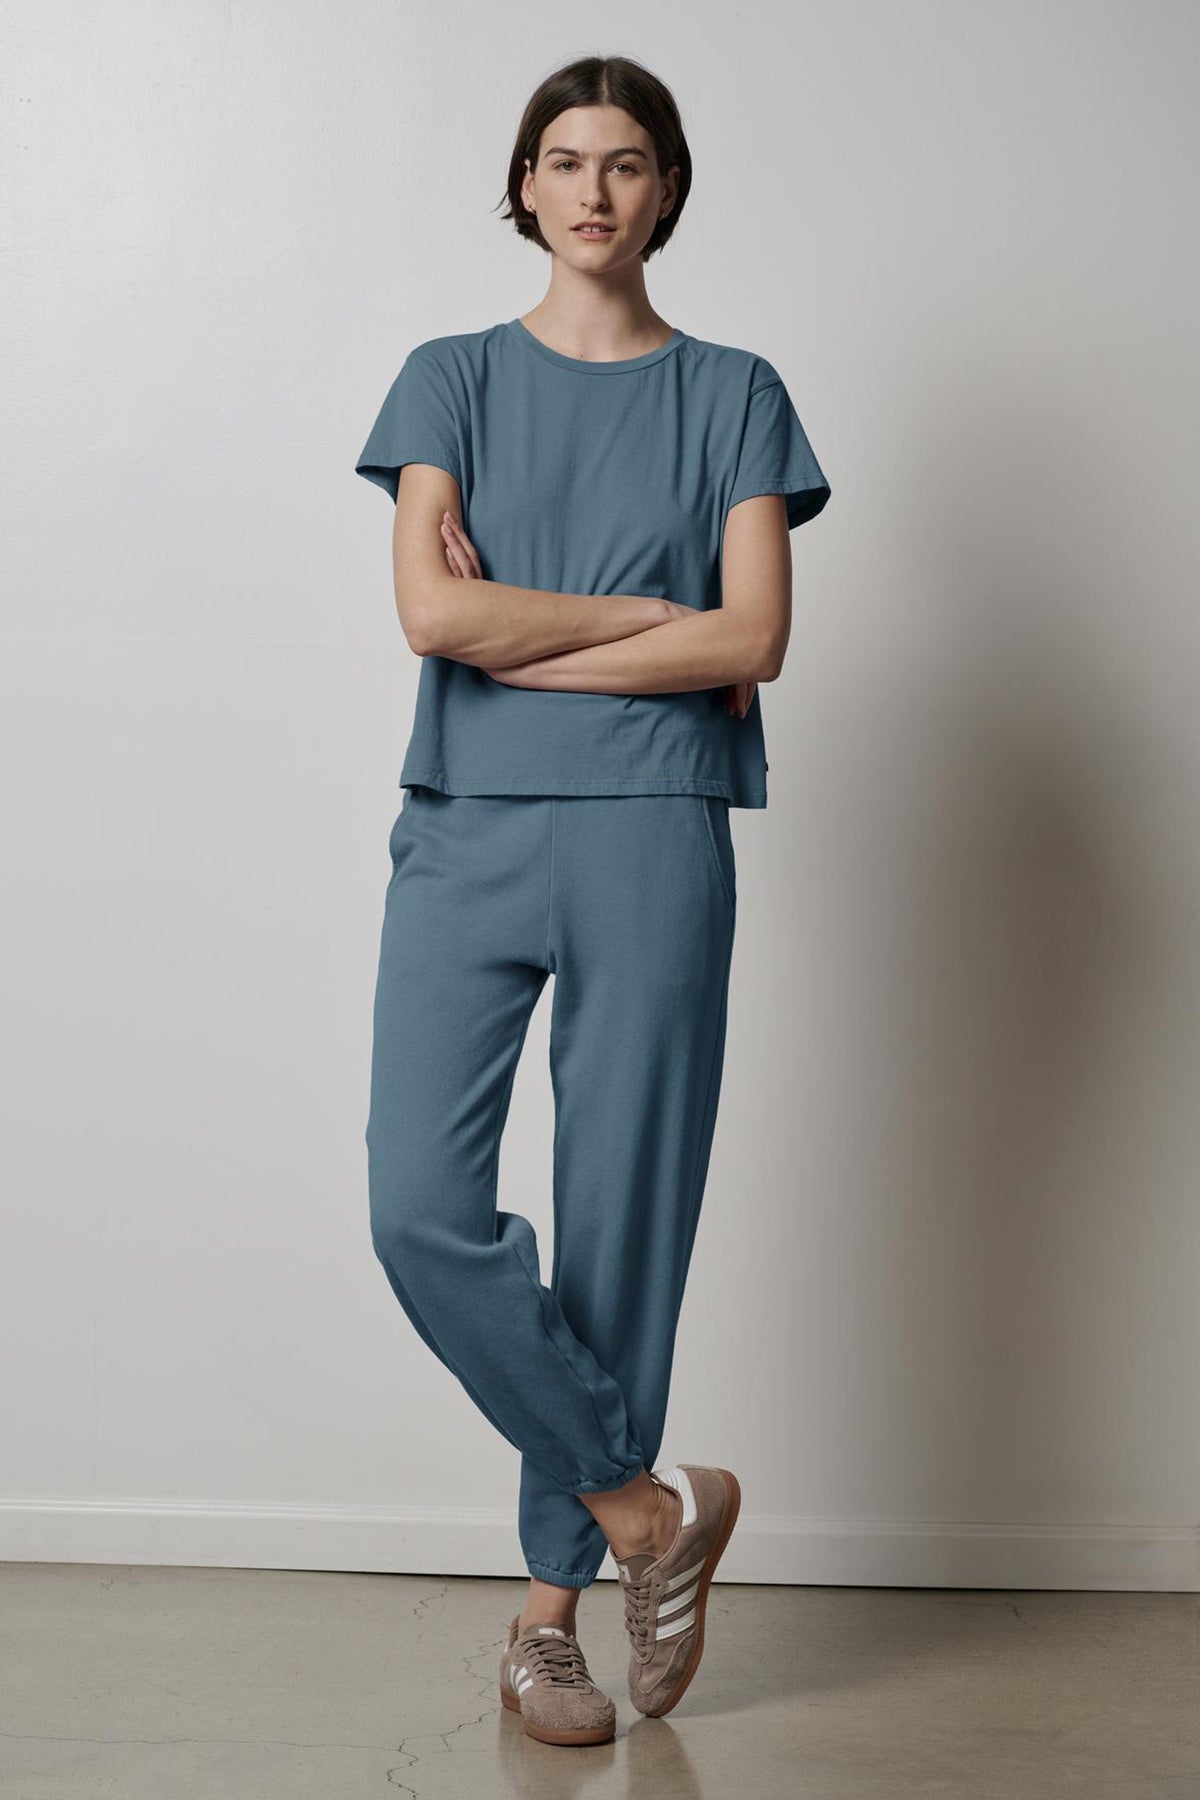 A woman standing with arms crossed wearing a casual blue t-shirt and Velvet by Jenny Graham ZUMA SWEATPANT outfit with brown sneakers.-35721209610433